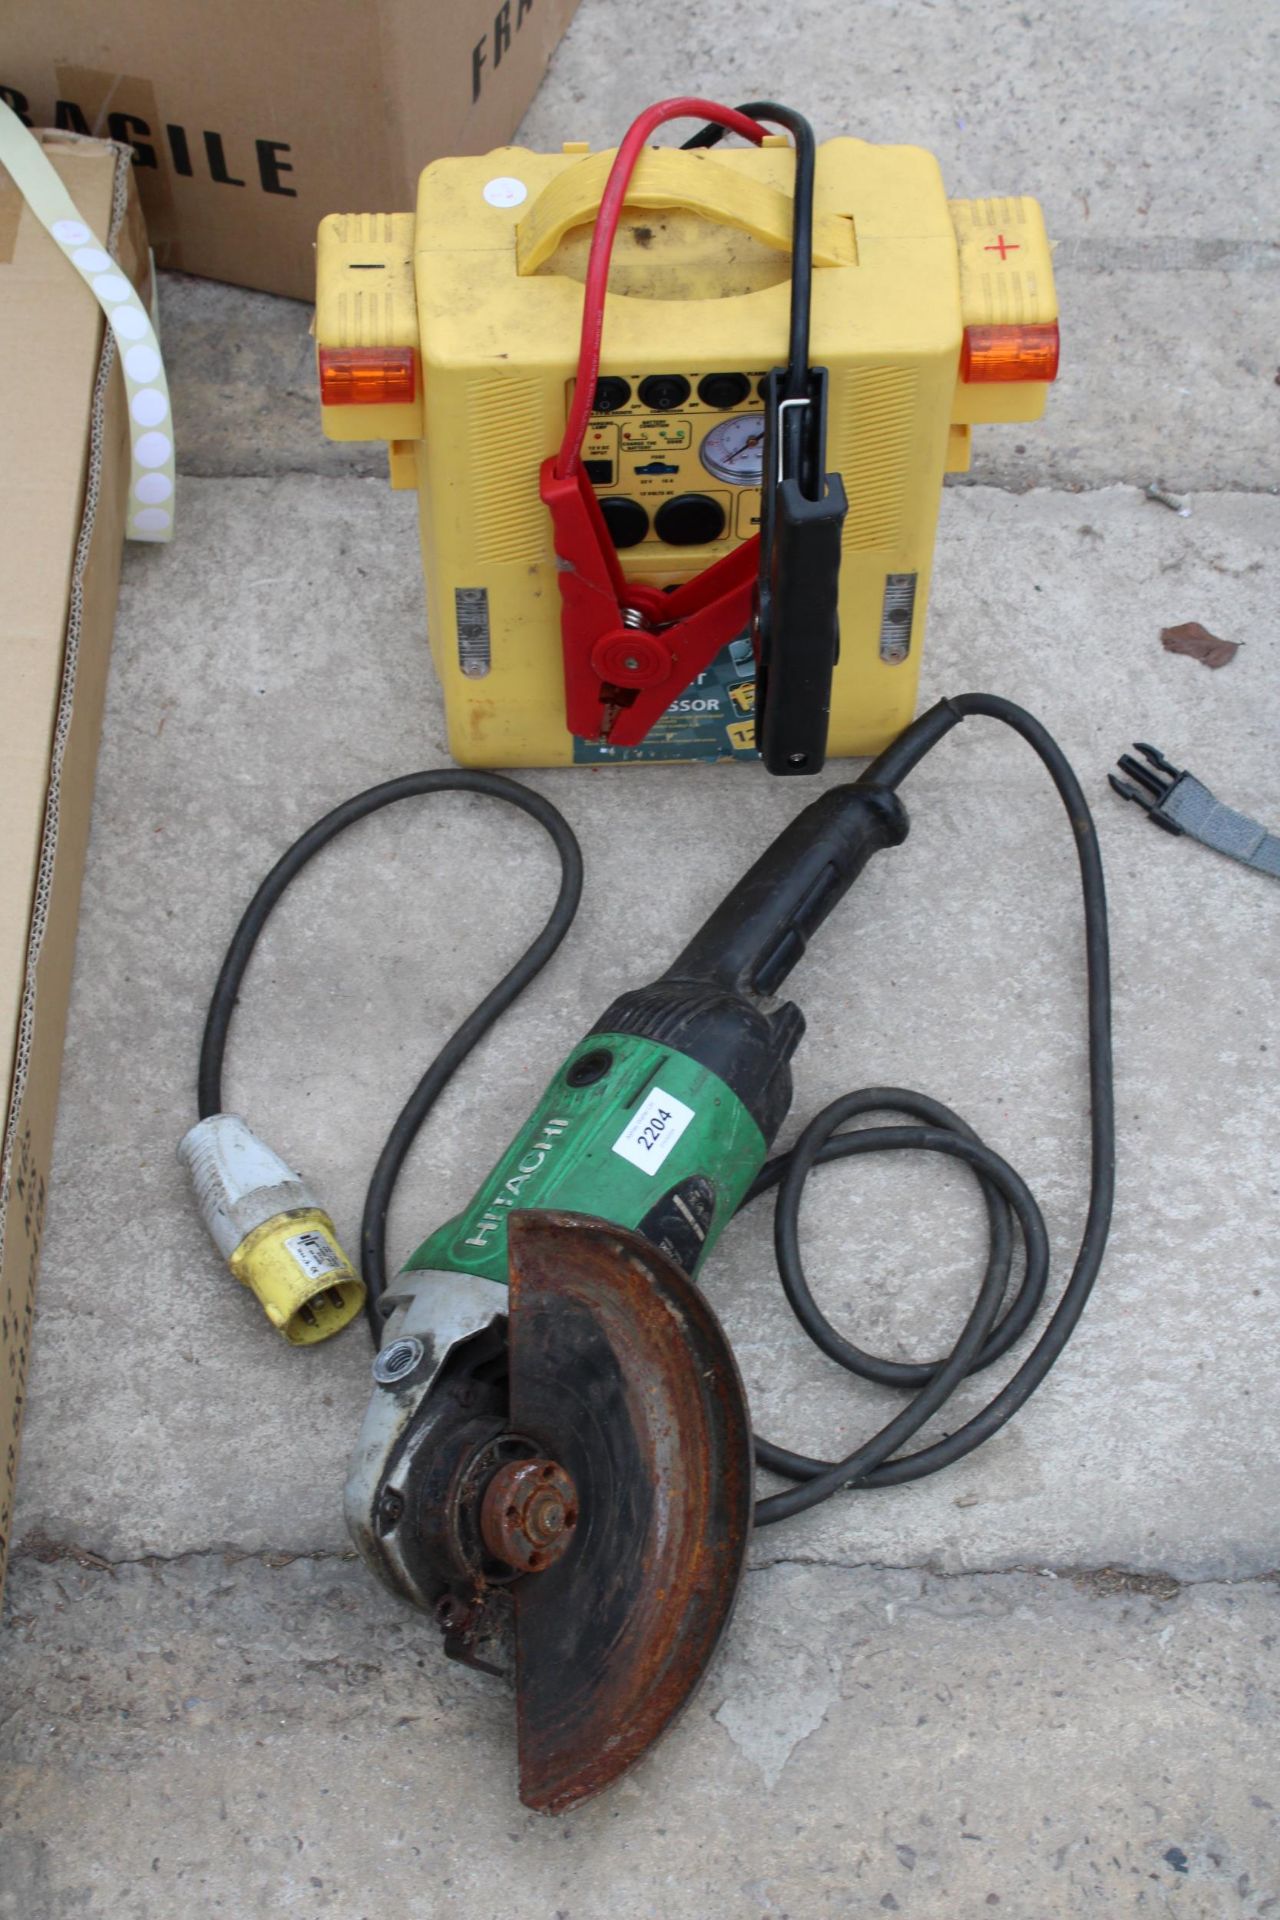 AN HITACHI ELECTRIC ANGLE GRINDER AND A JUMP STARTER PACK